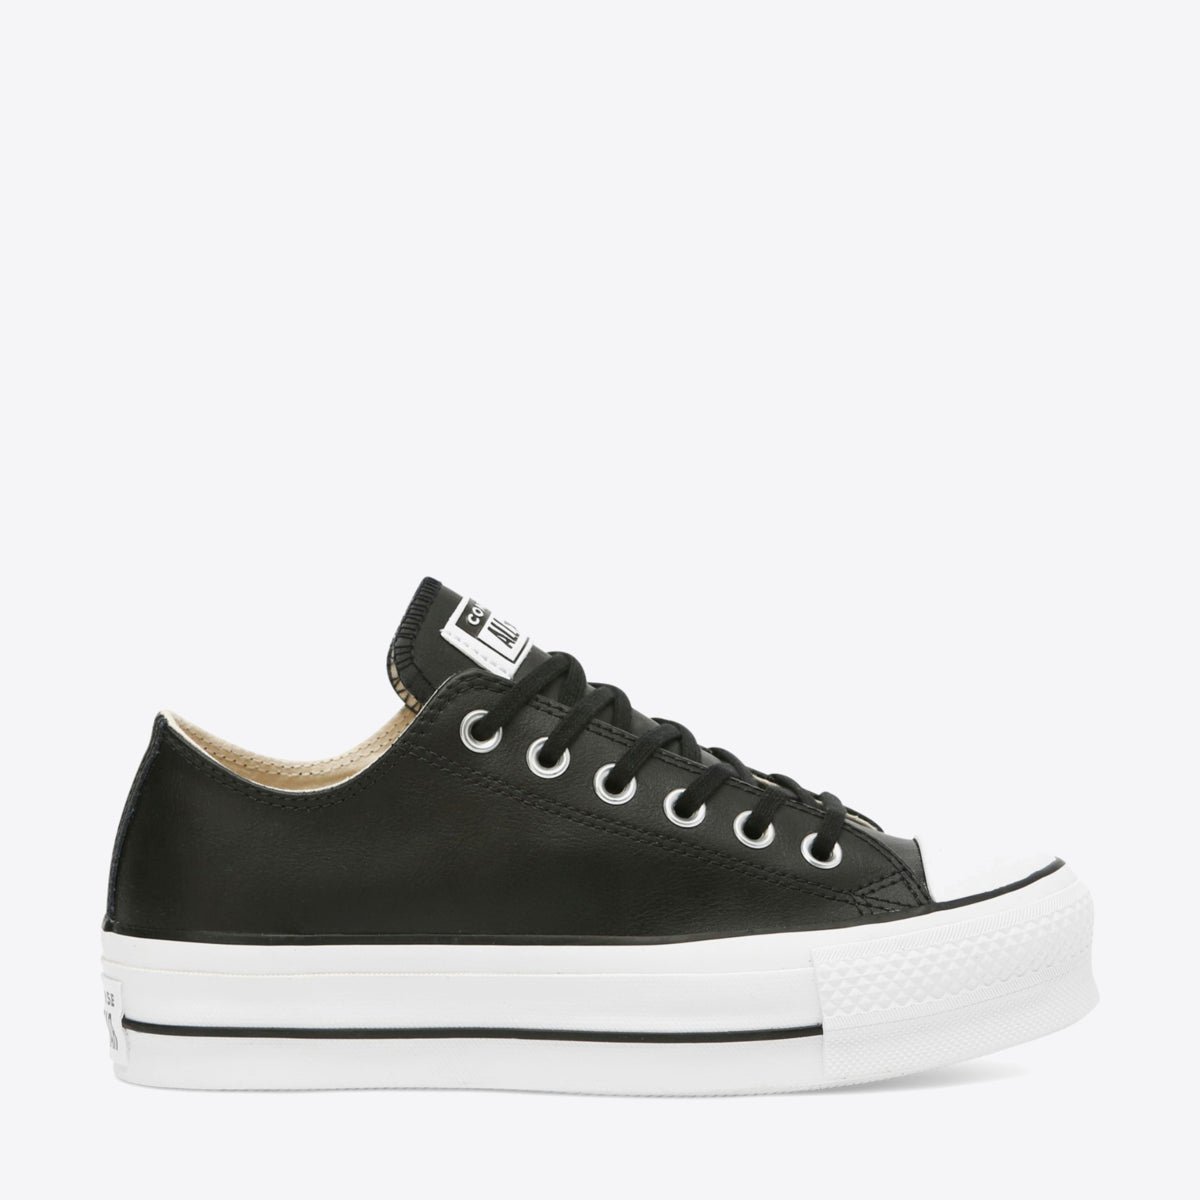 CONVERSE Chuck Taylor All Star Leather Lift Low Black/White - Image 2